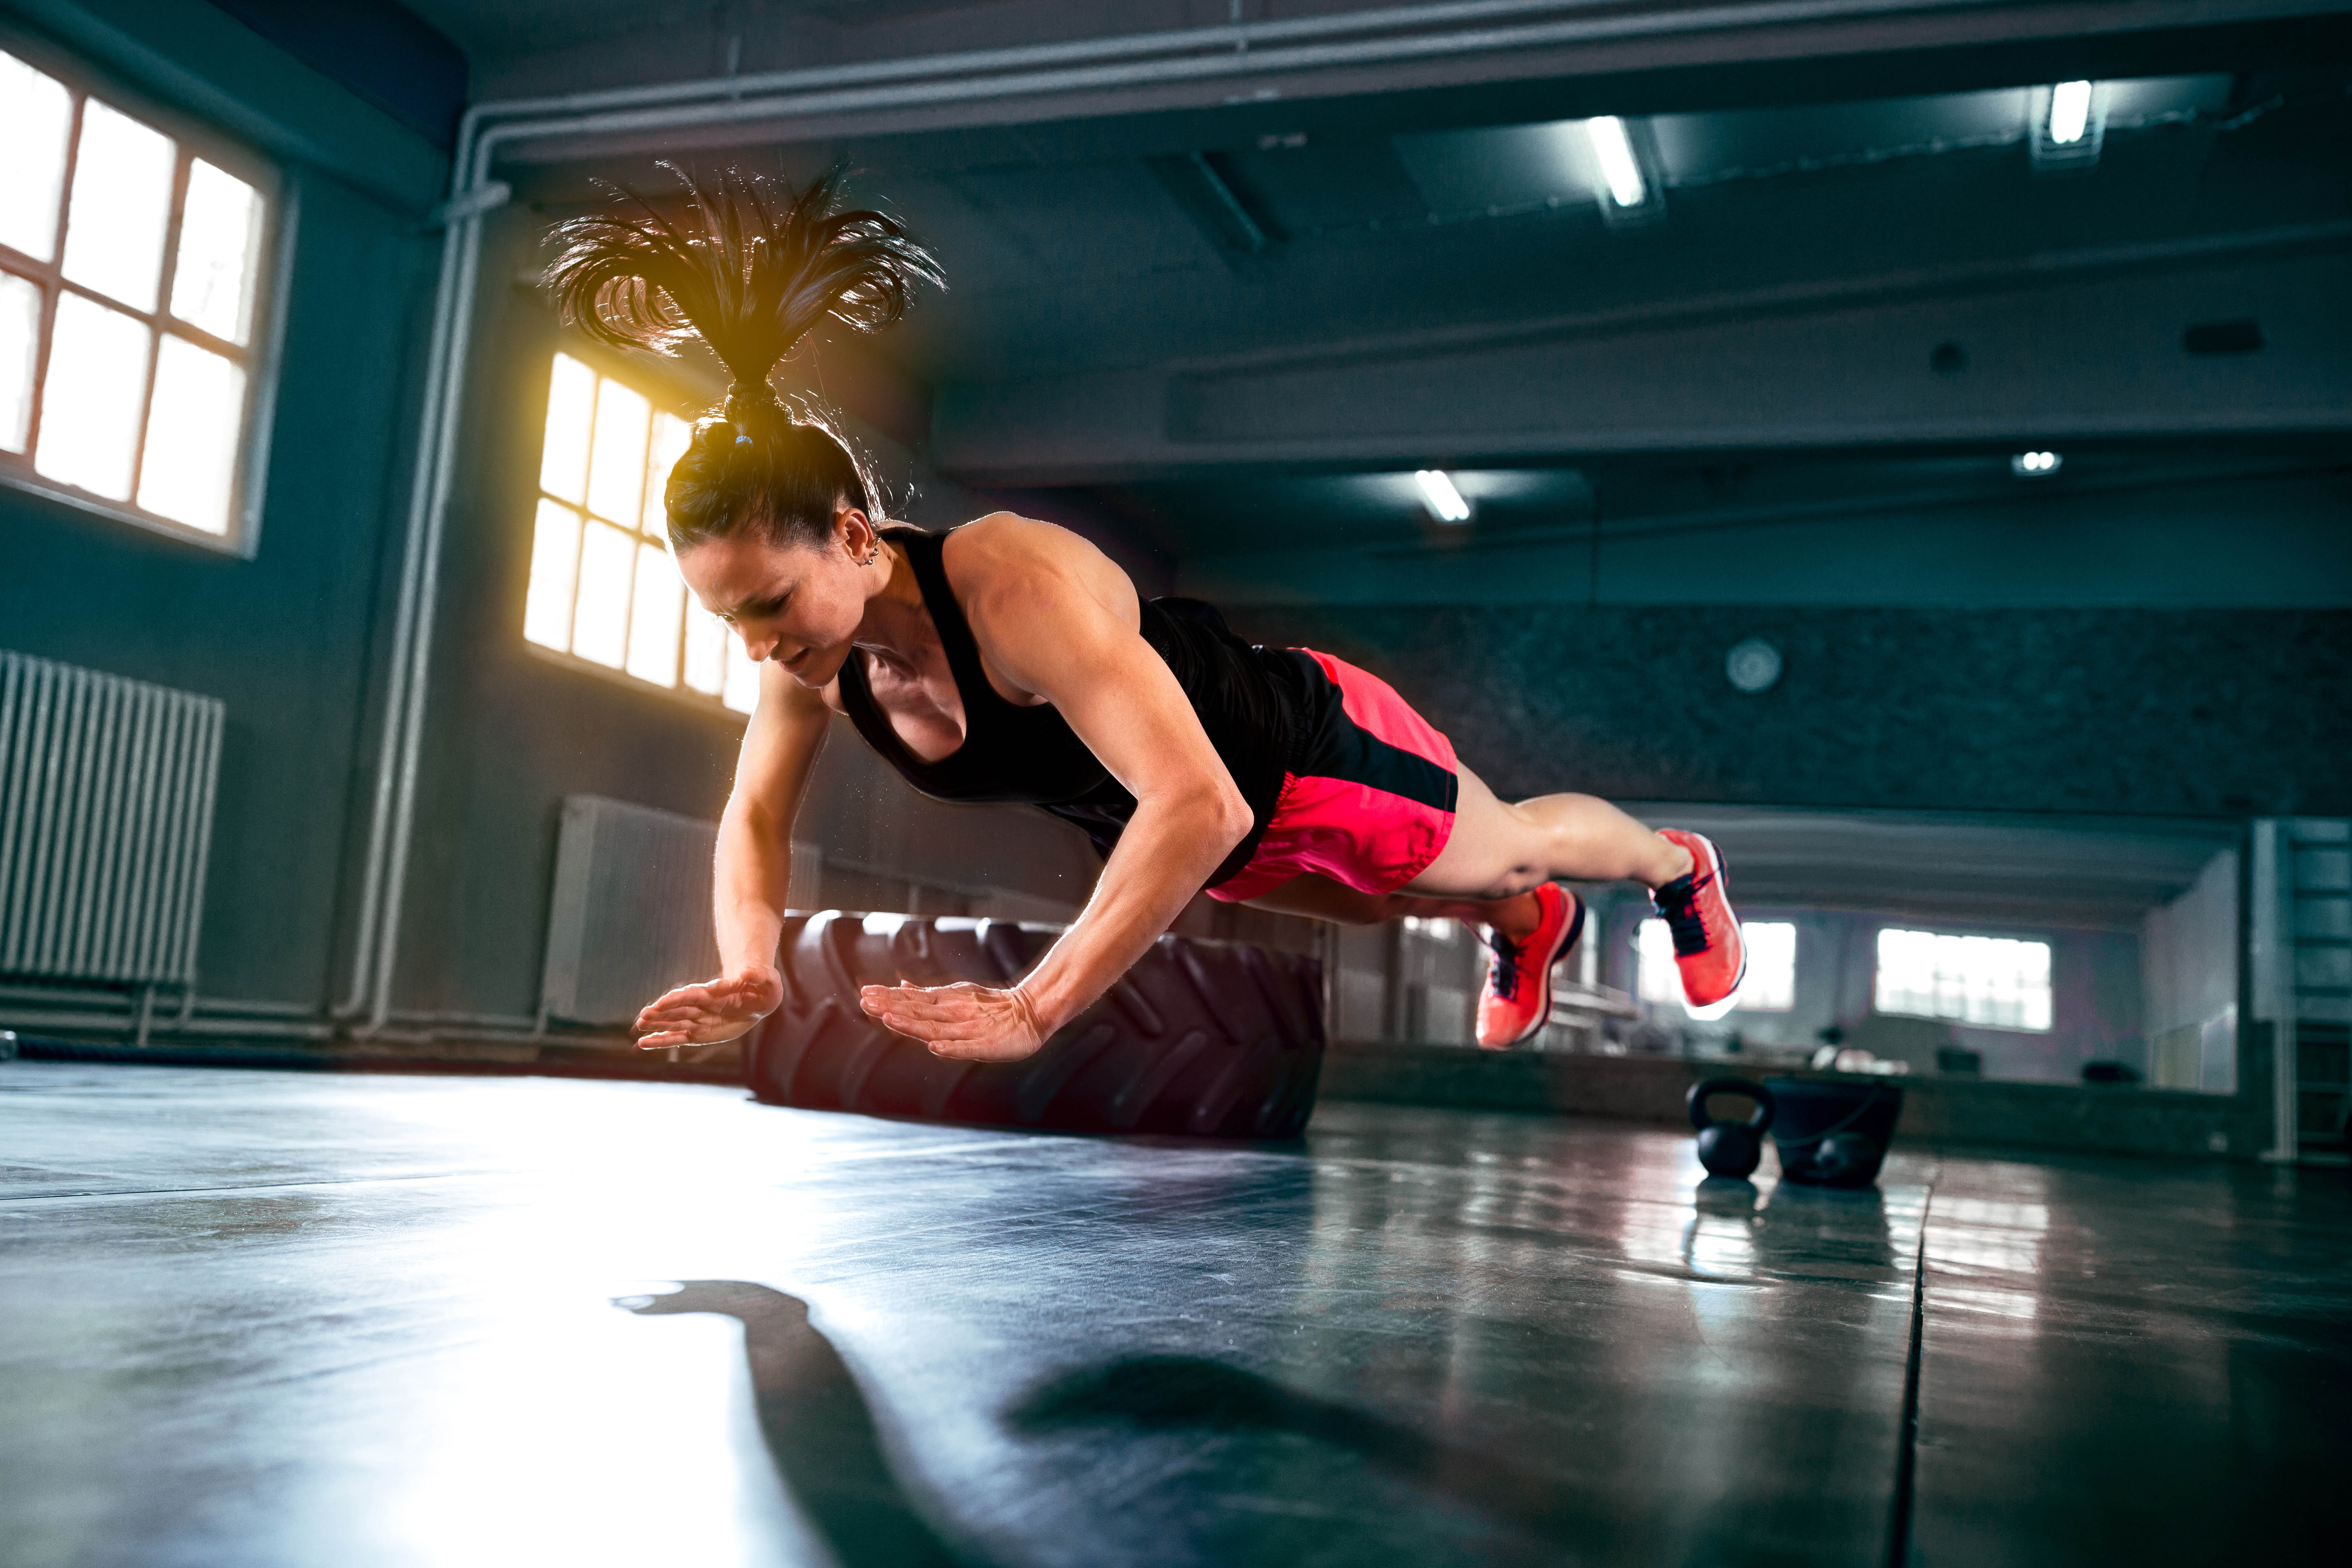 Young, fit woman mid-flight during a clapping push-up. Background is a gym, light streaming in through the window.